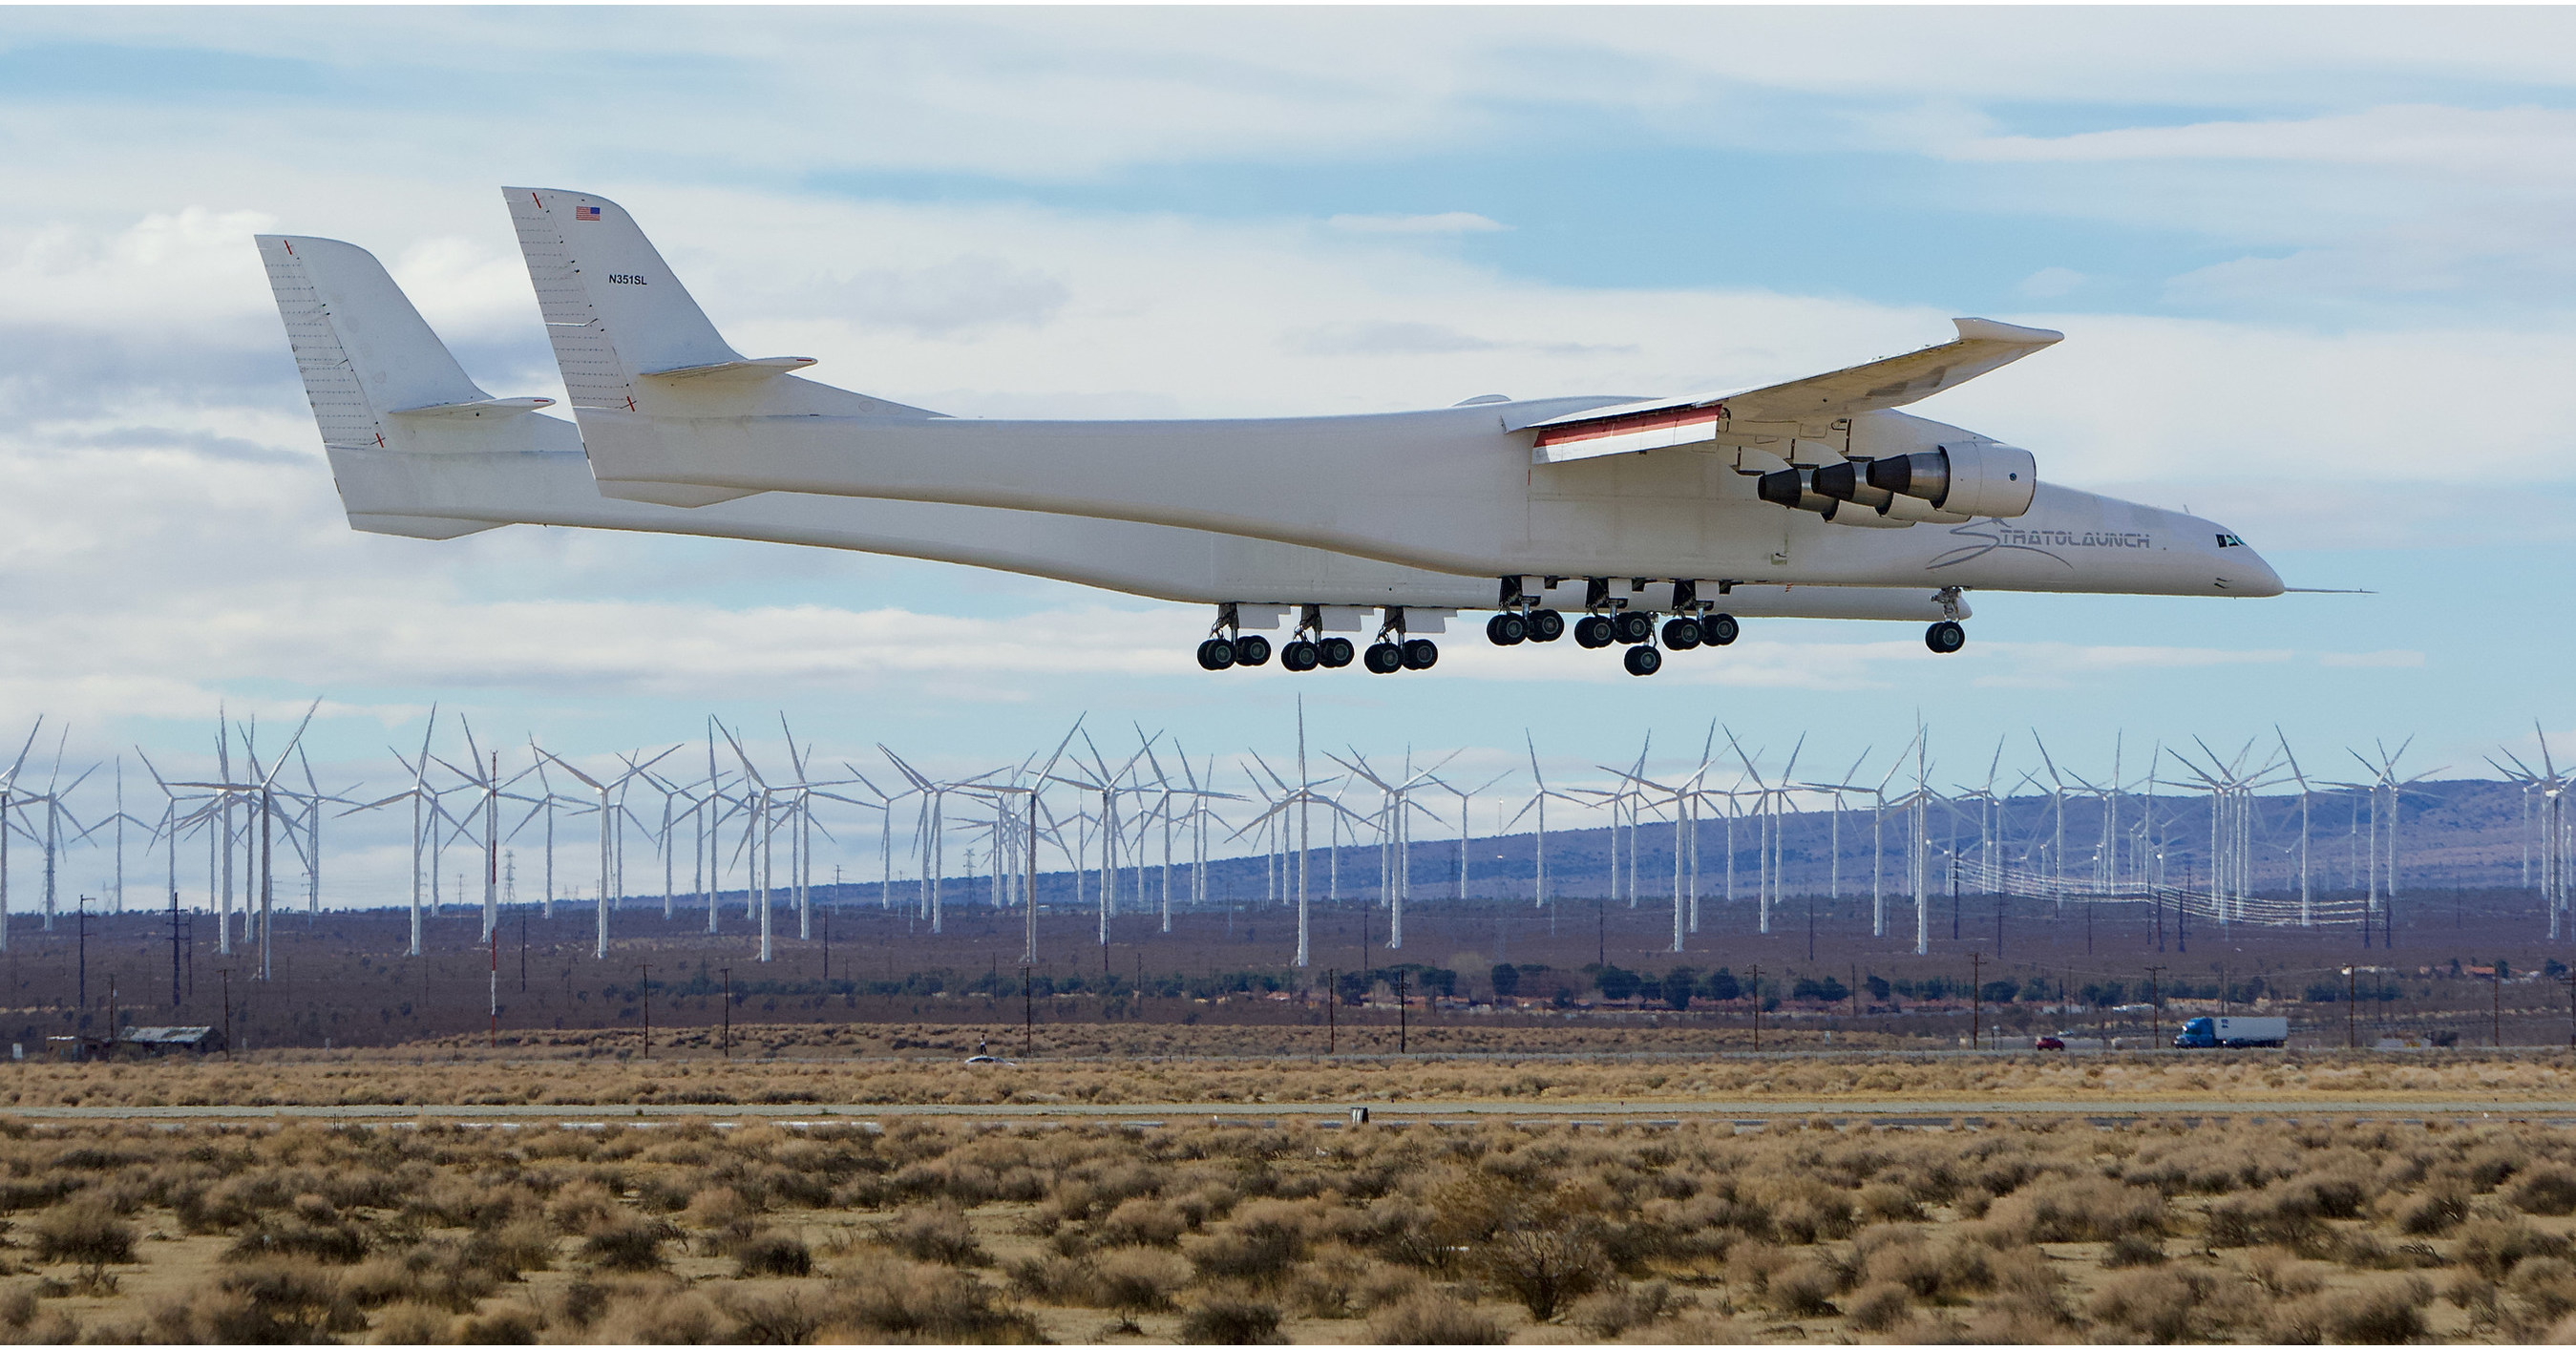 Stratolaunch Roc Carrier Aircraft Completes Third Flight Test